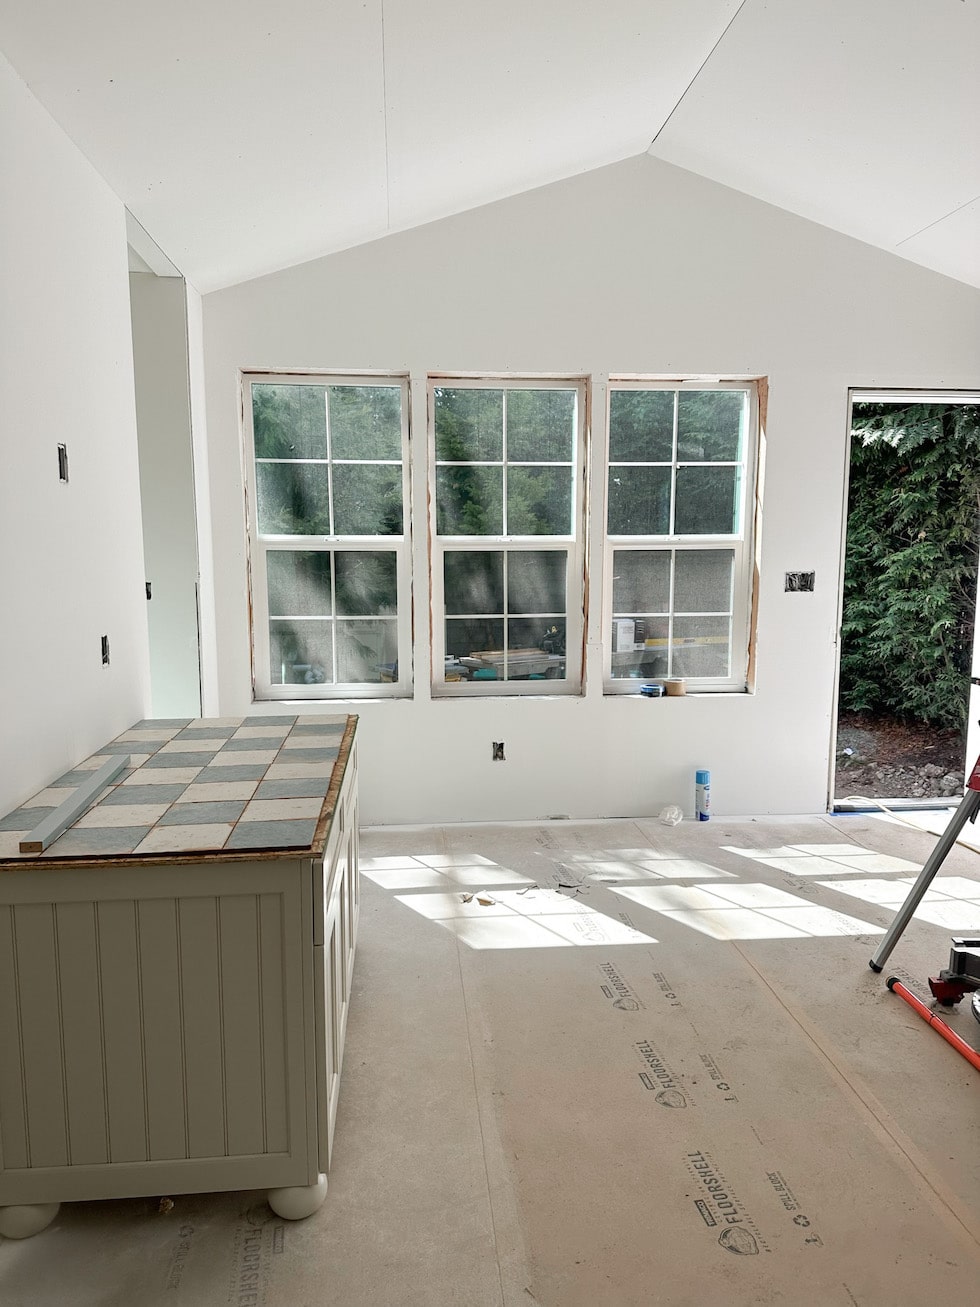 Beach House Kitchen Remodel Update + Tiny Cottage